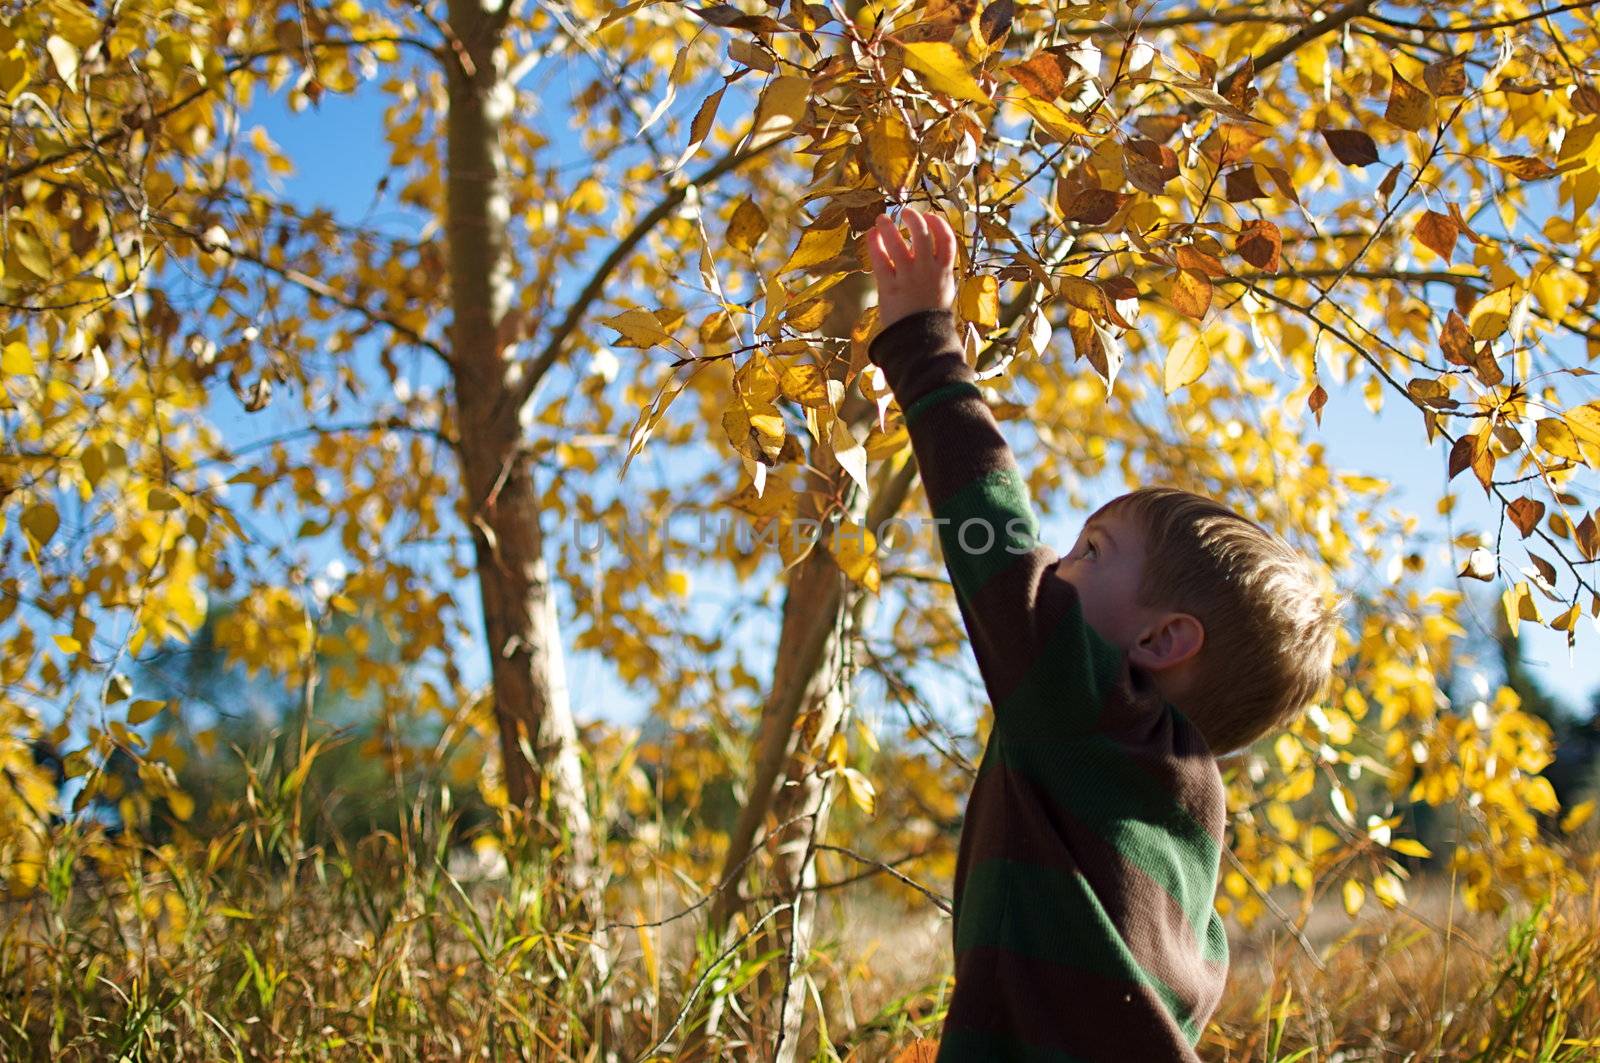 A young boy reaches up to pluck leaves from a tree.